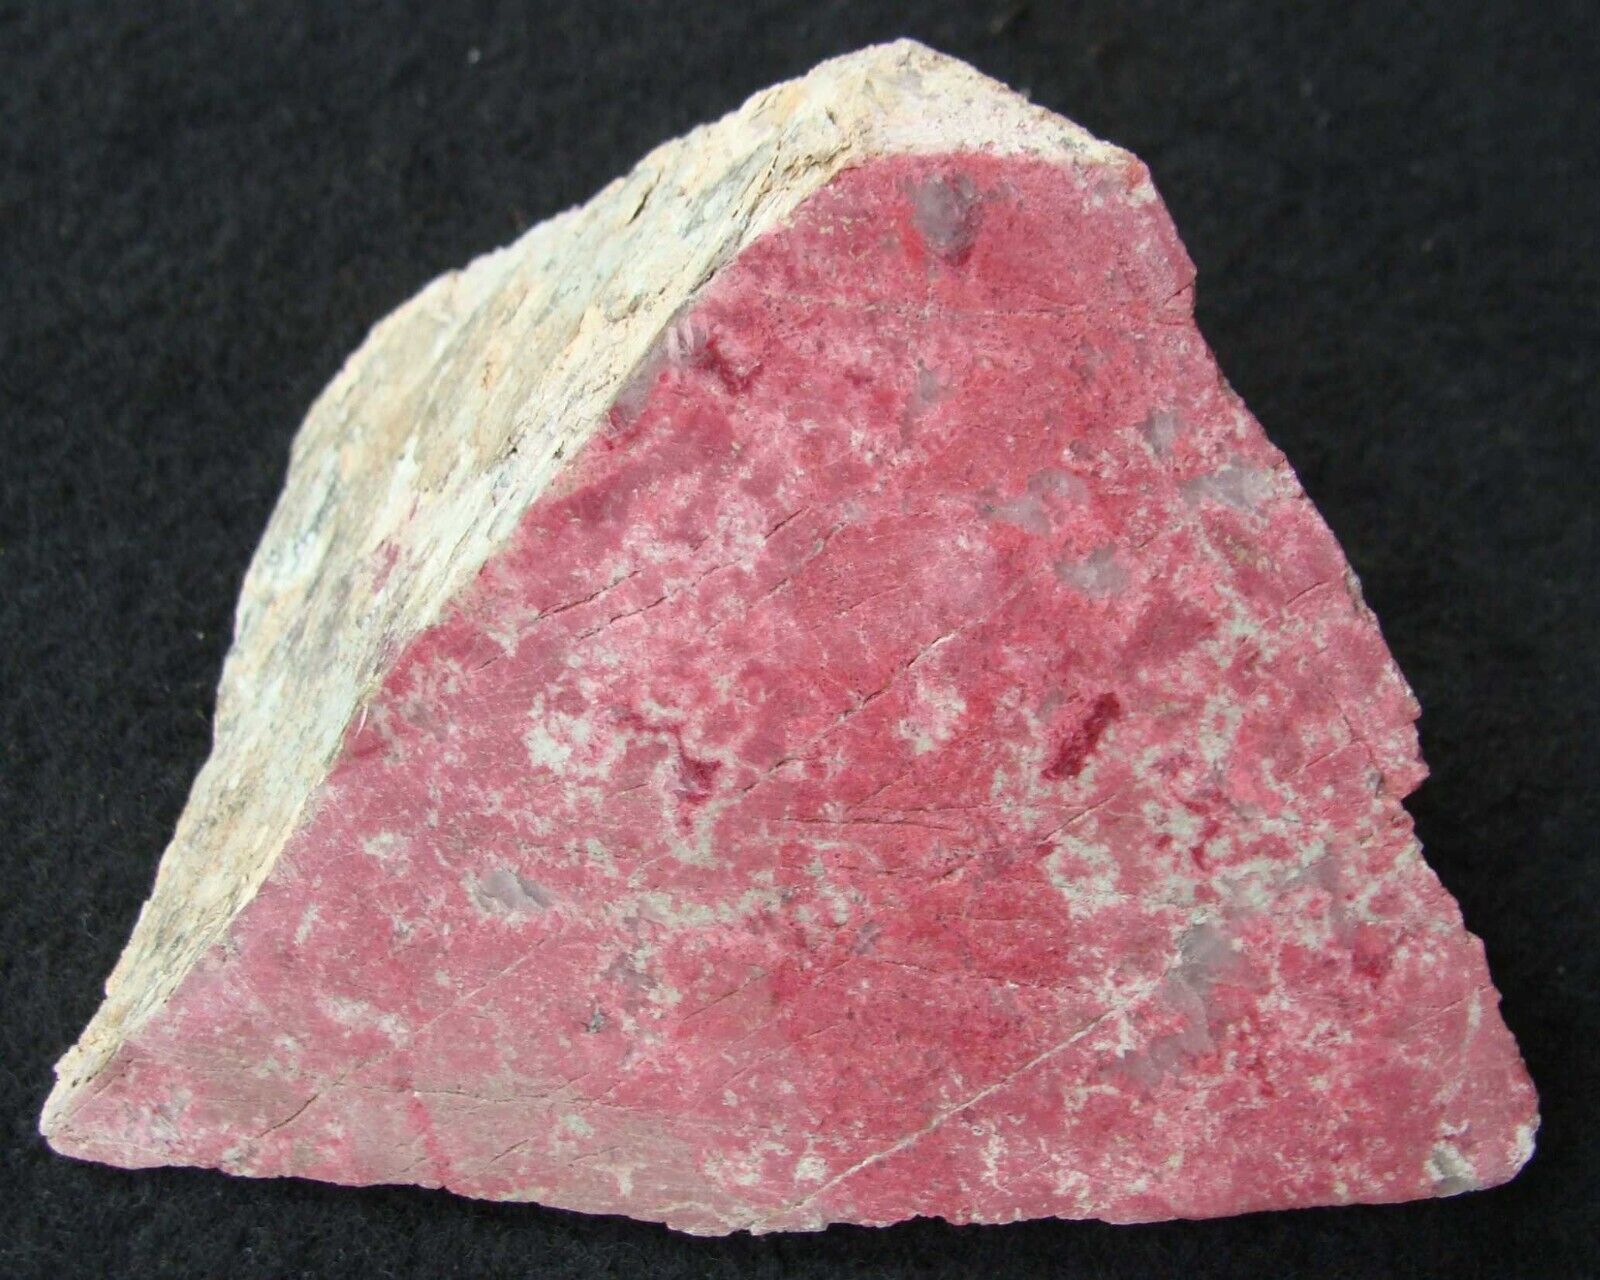 Rare NORWEGIAN PINK THULITE faced rough… seldom offered… beautiful color… 1.6 lb